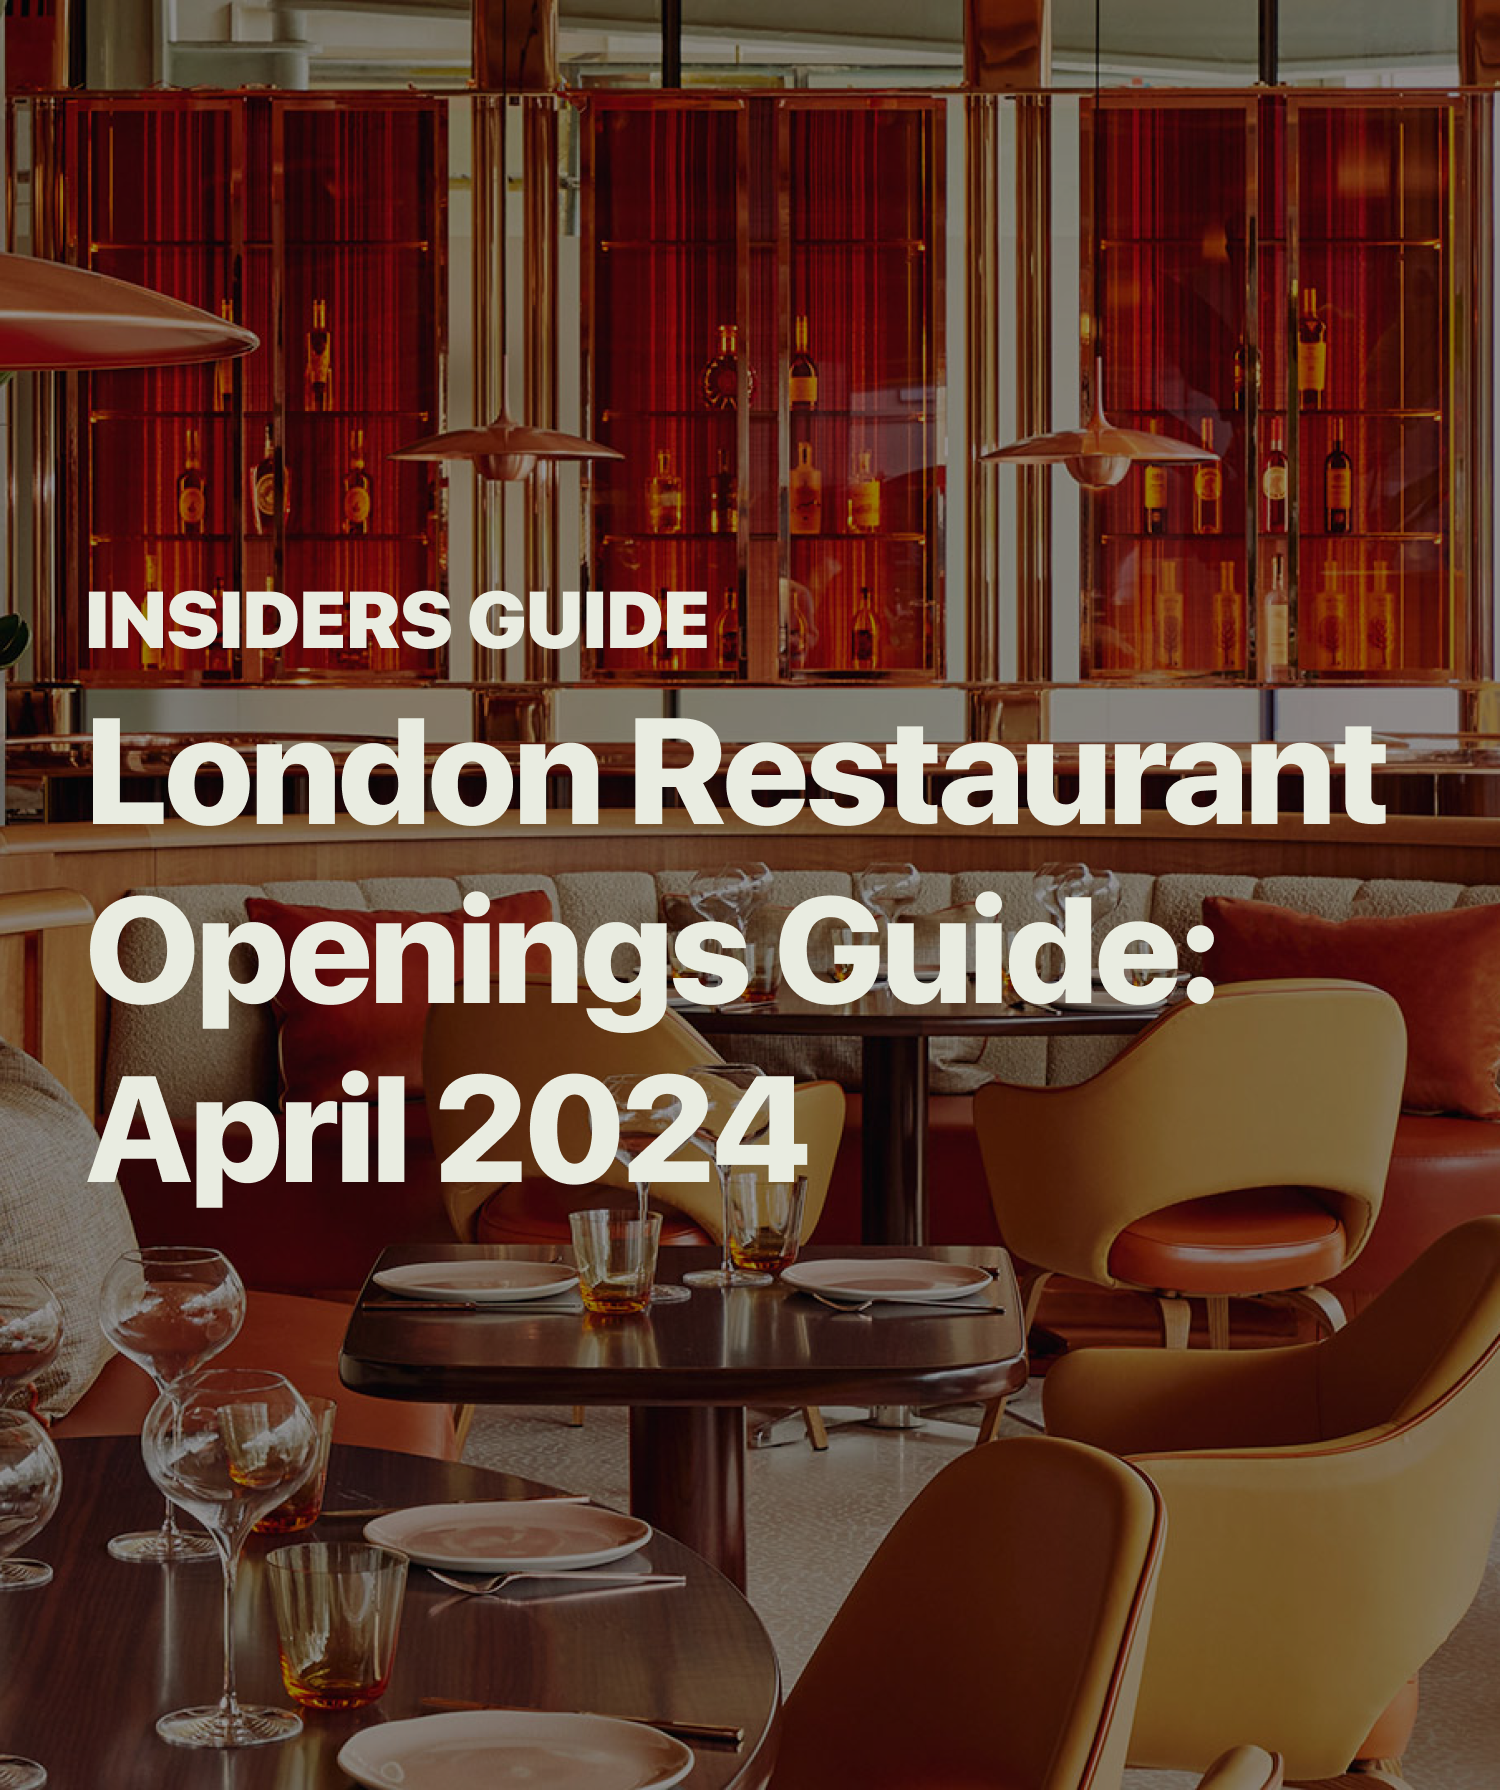 The Best New Restaurant Openings in London: Exclusive Guide [April 2024]